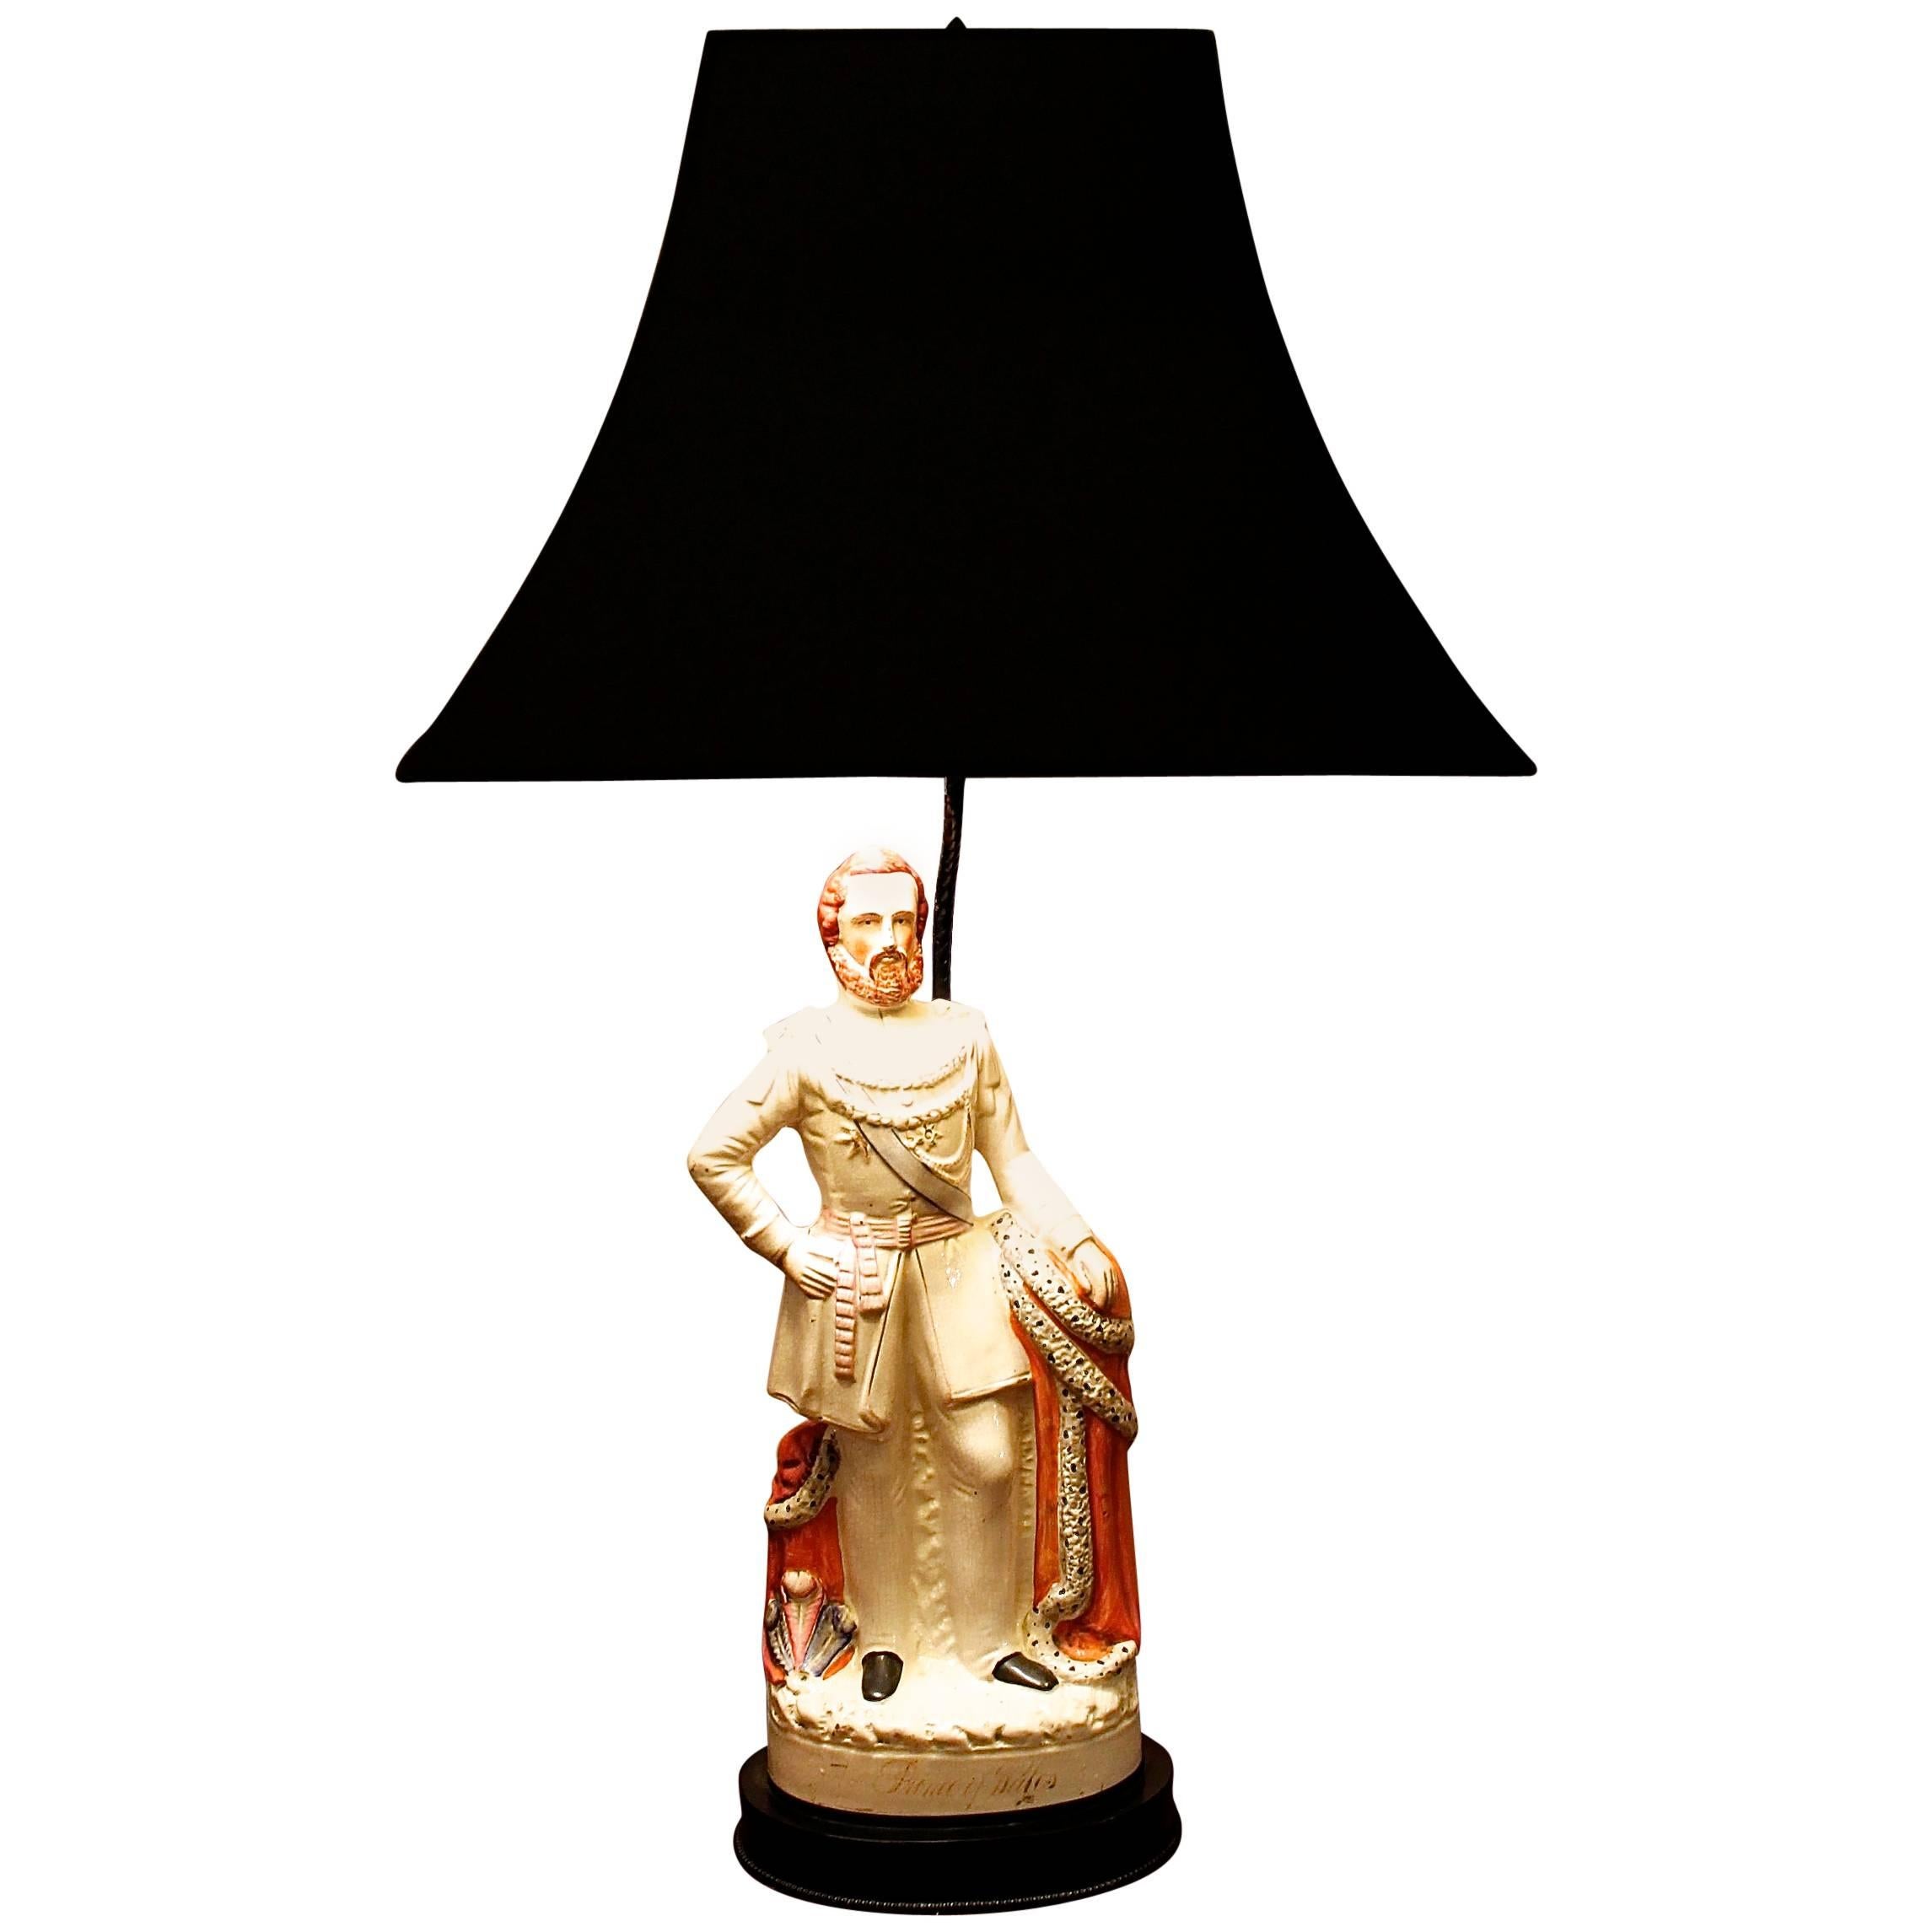 Prince of Wales Staffordshire Lamp For Sale